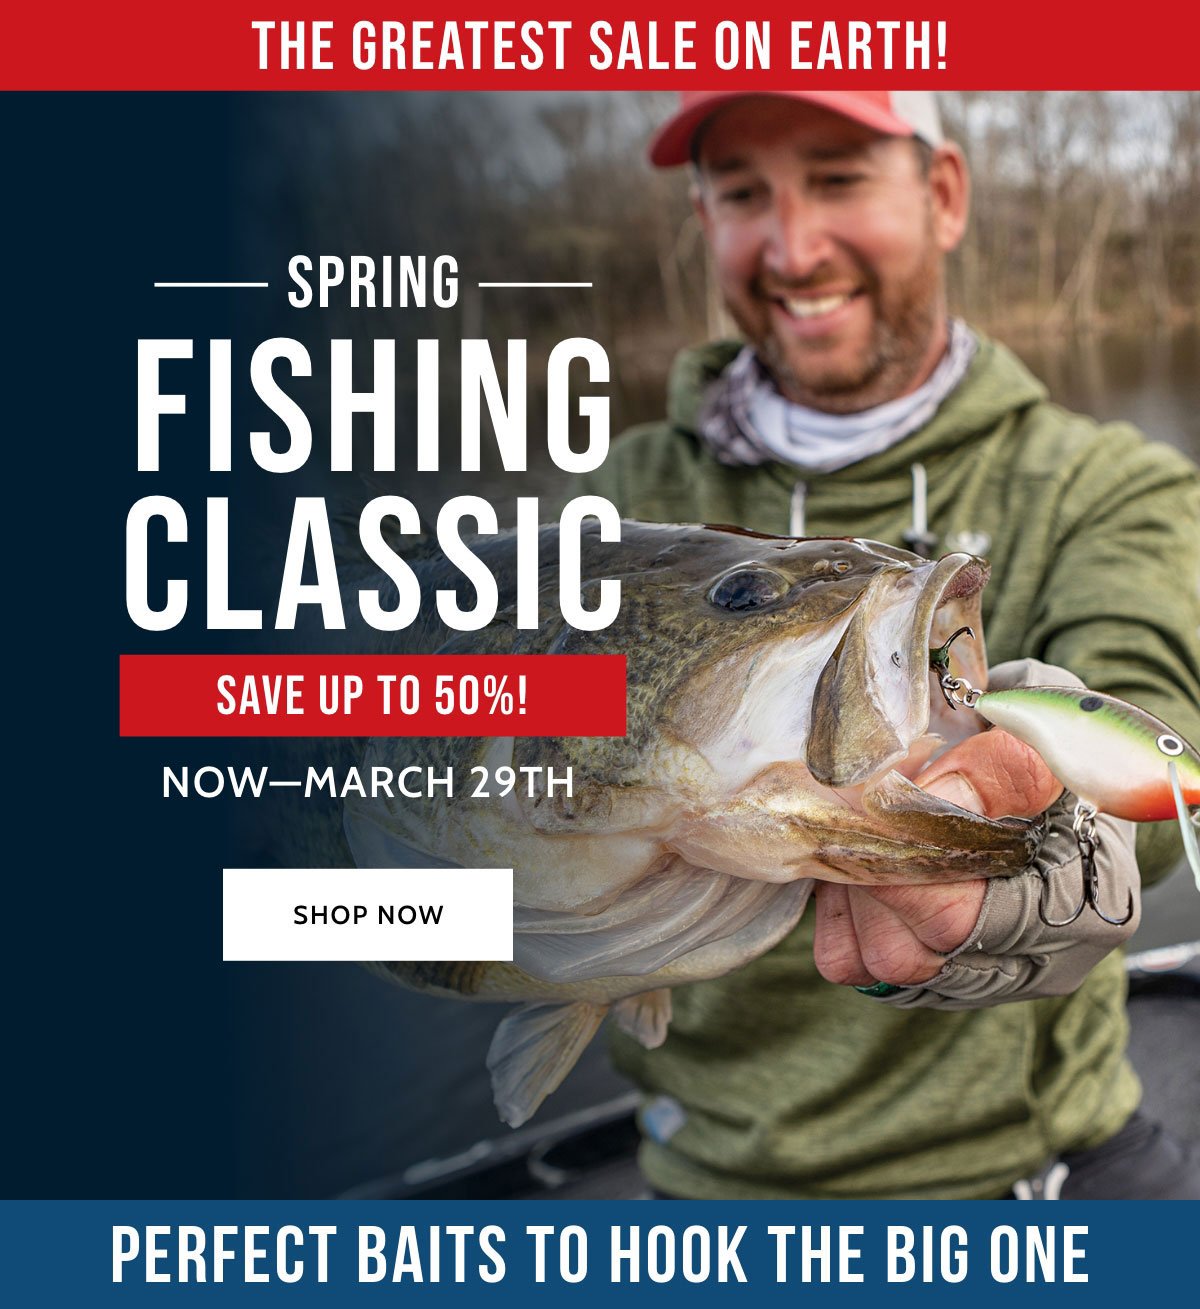 Bass Pro Shops: Our Biggest Fishing Sale Of The Year Is Going On